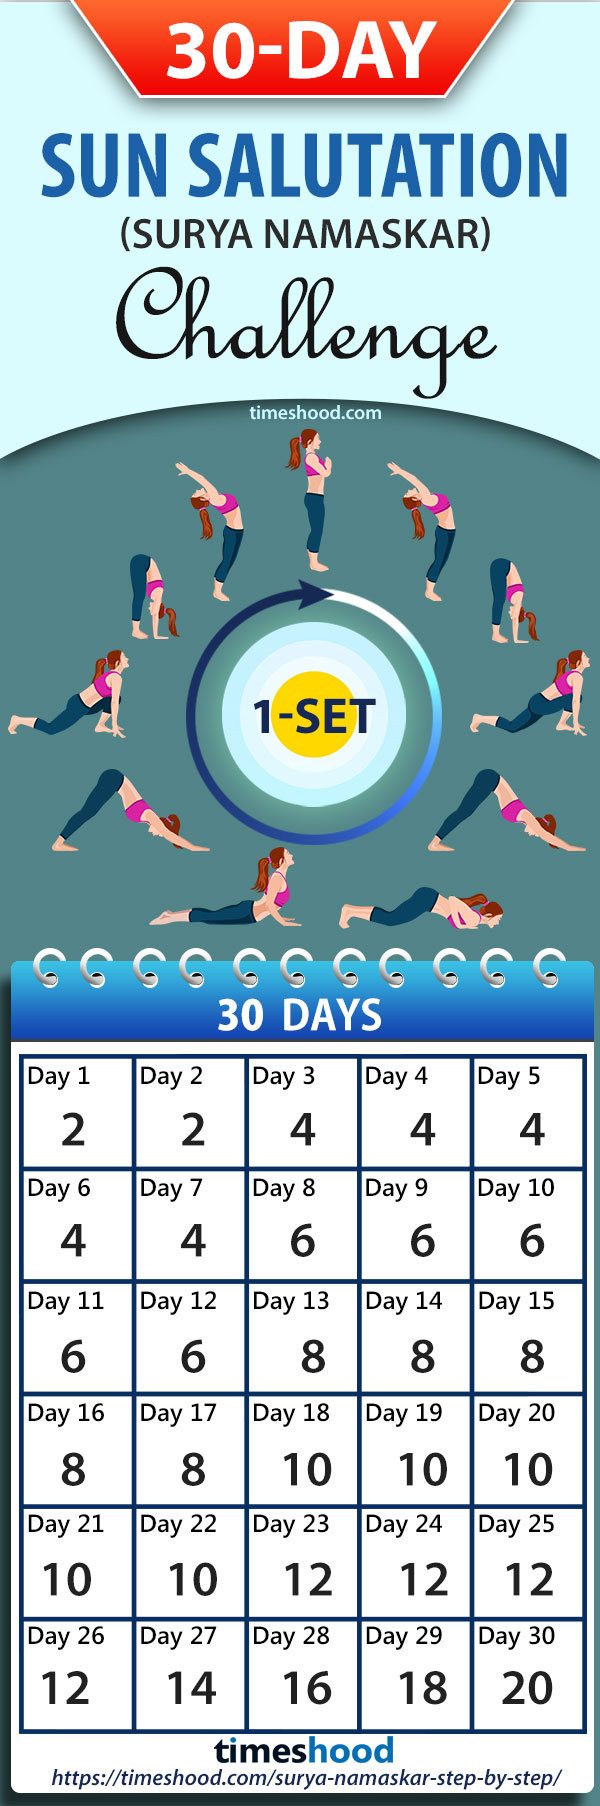 30 Days Sun Salutation Yoga Workout challenge for beginners. Surya Namaskar (Sun Salutation) Practice Step by Step Every Morning, Best Morning Yoga Workout for Weight loss, Flat belly, strengthen your body.